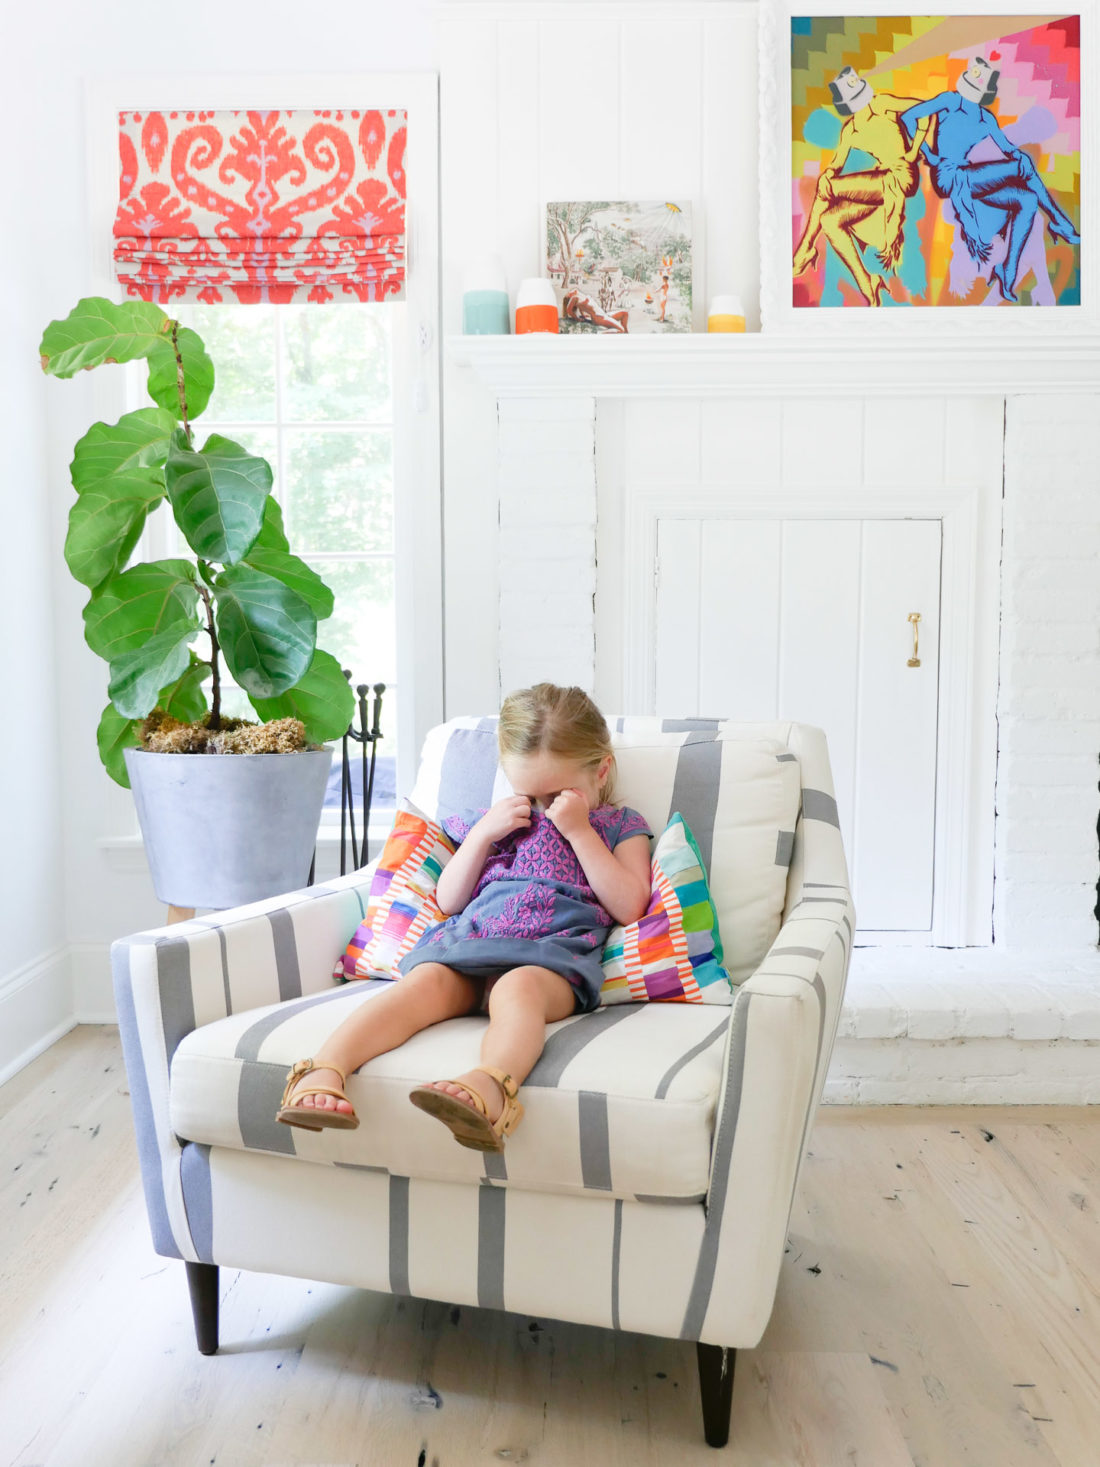 Marlowe Martino wears an embroidered dress and sits in a striped armchair in the family room of her Connecticut home